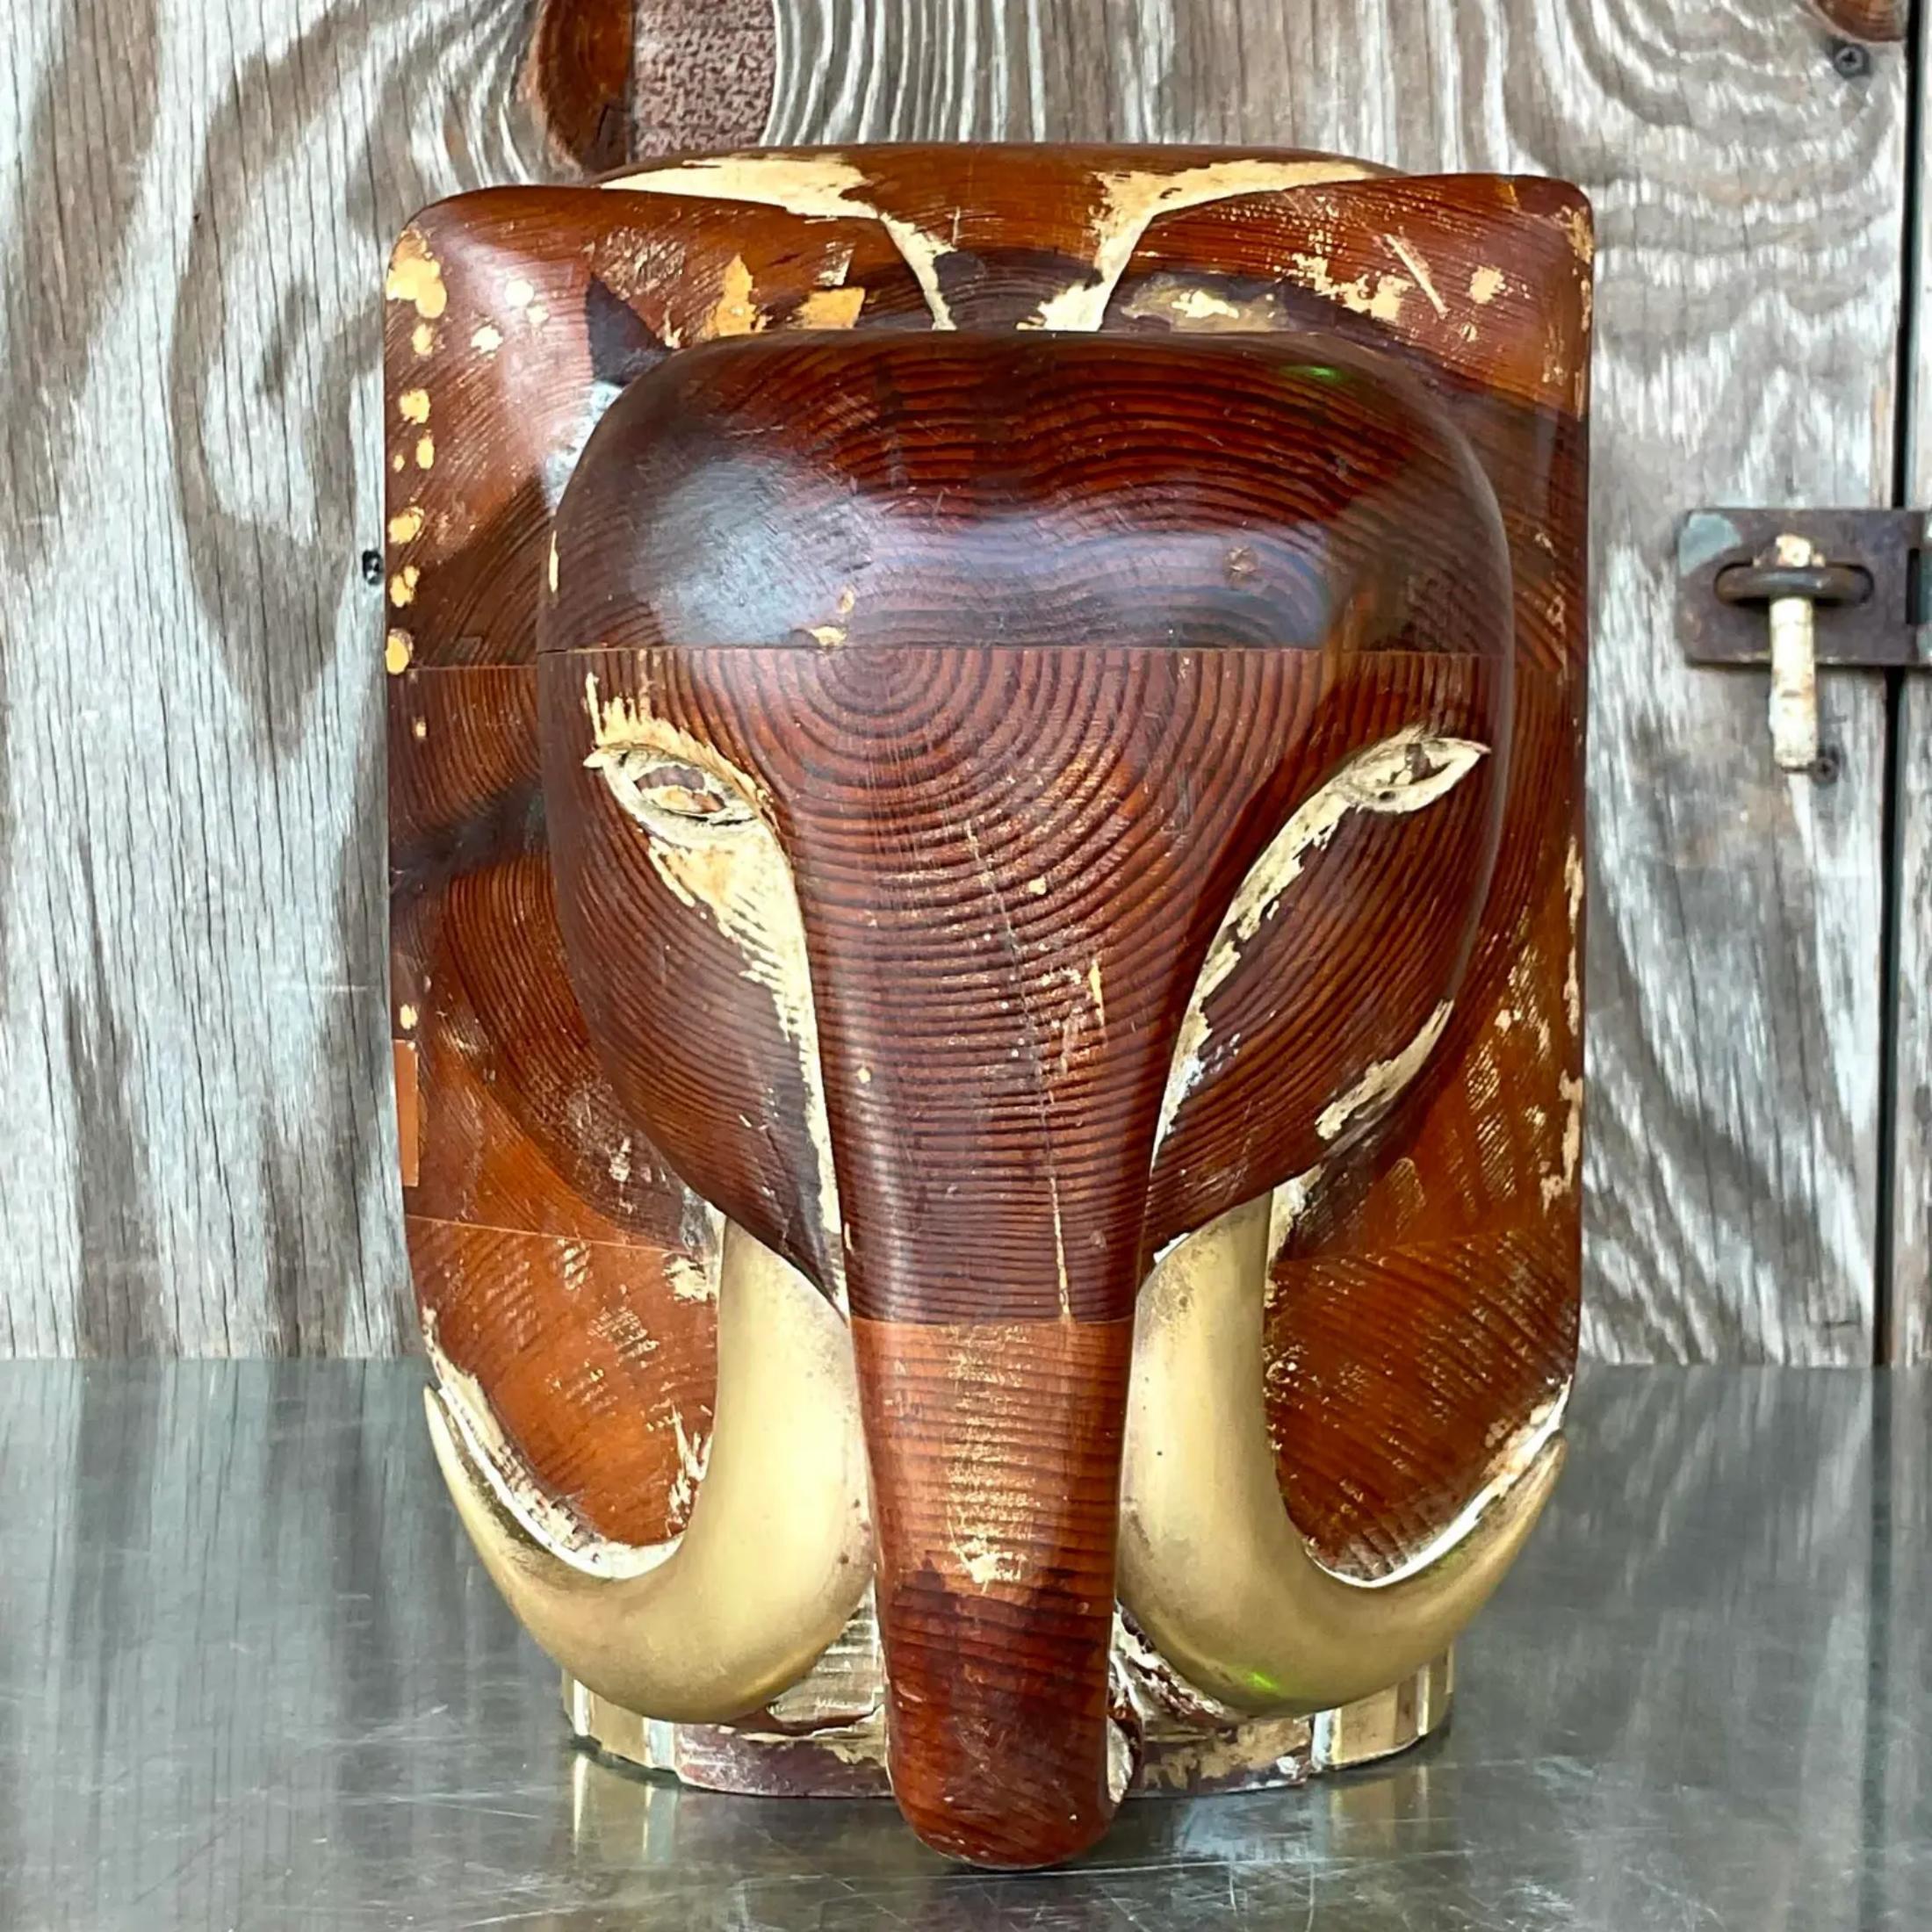 A stunning vintage 90s carved wooden elephant. A chic little fella made from carved wood with brass hardware. Beautiful wood grain detail. Acquired from a Palm Beach estate